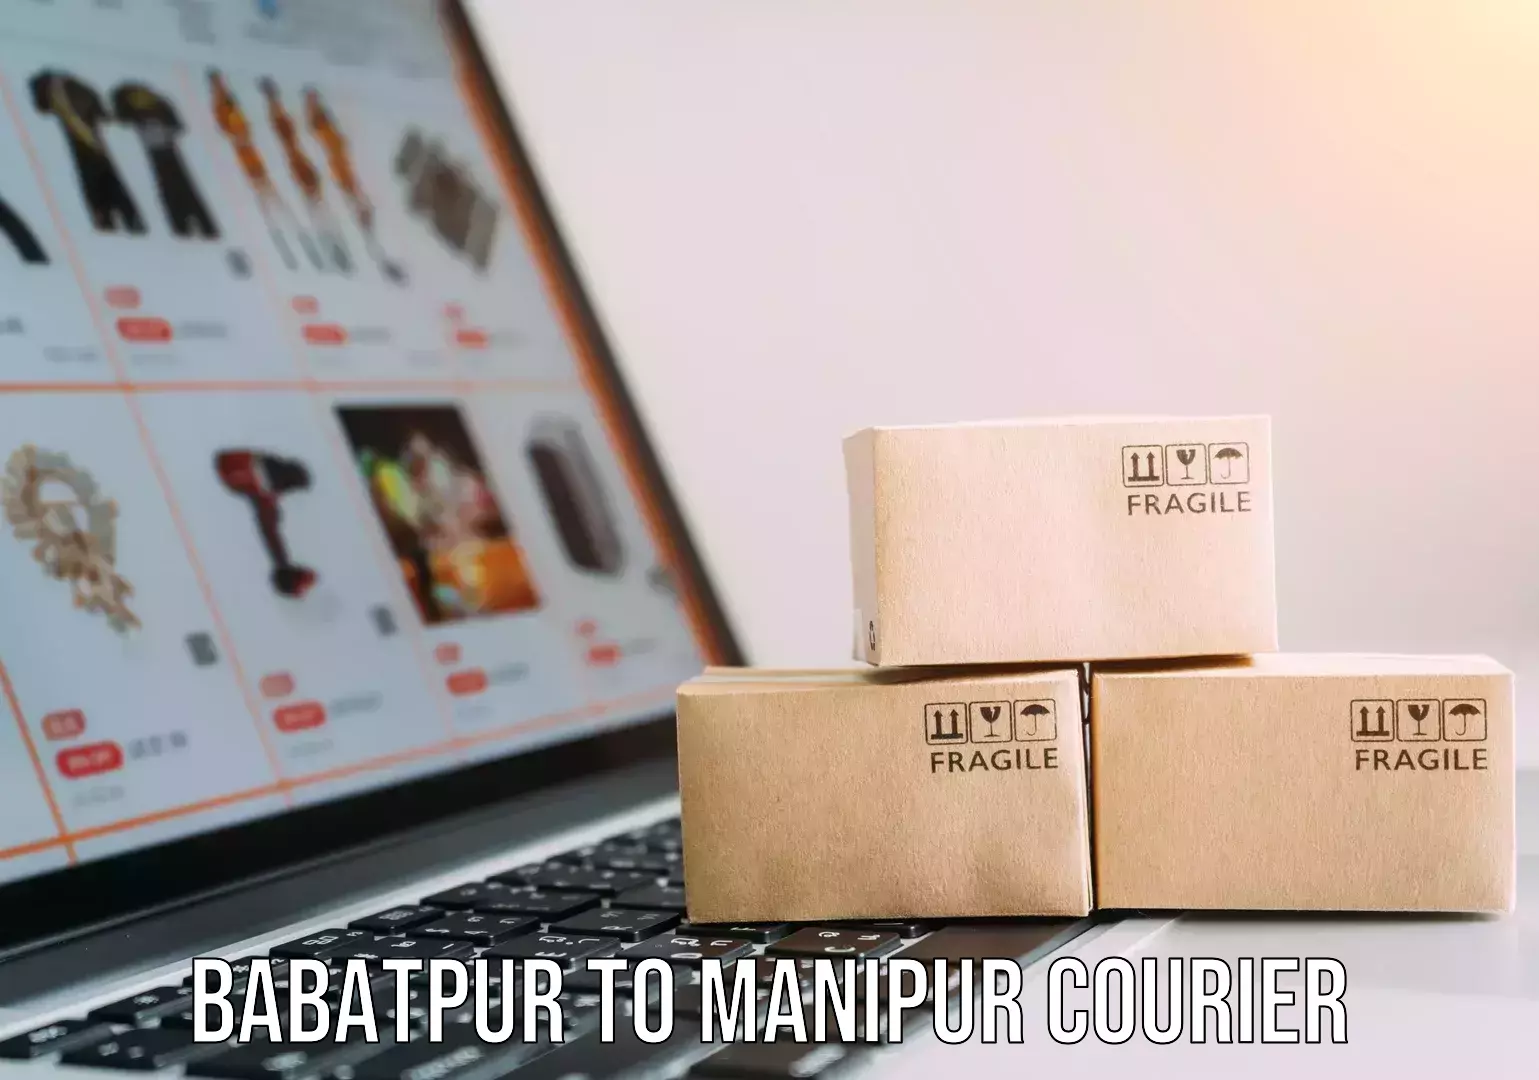 State-of-the-art courier technology Babatpur to Manipur